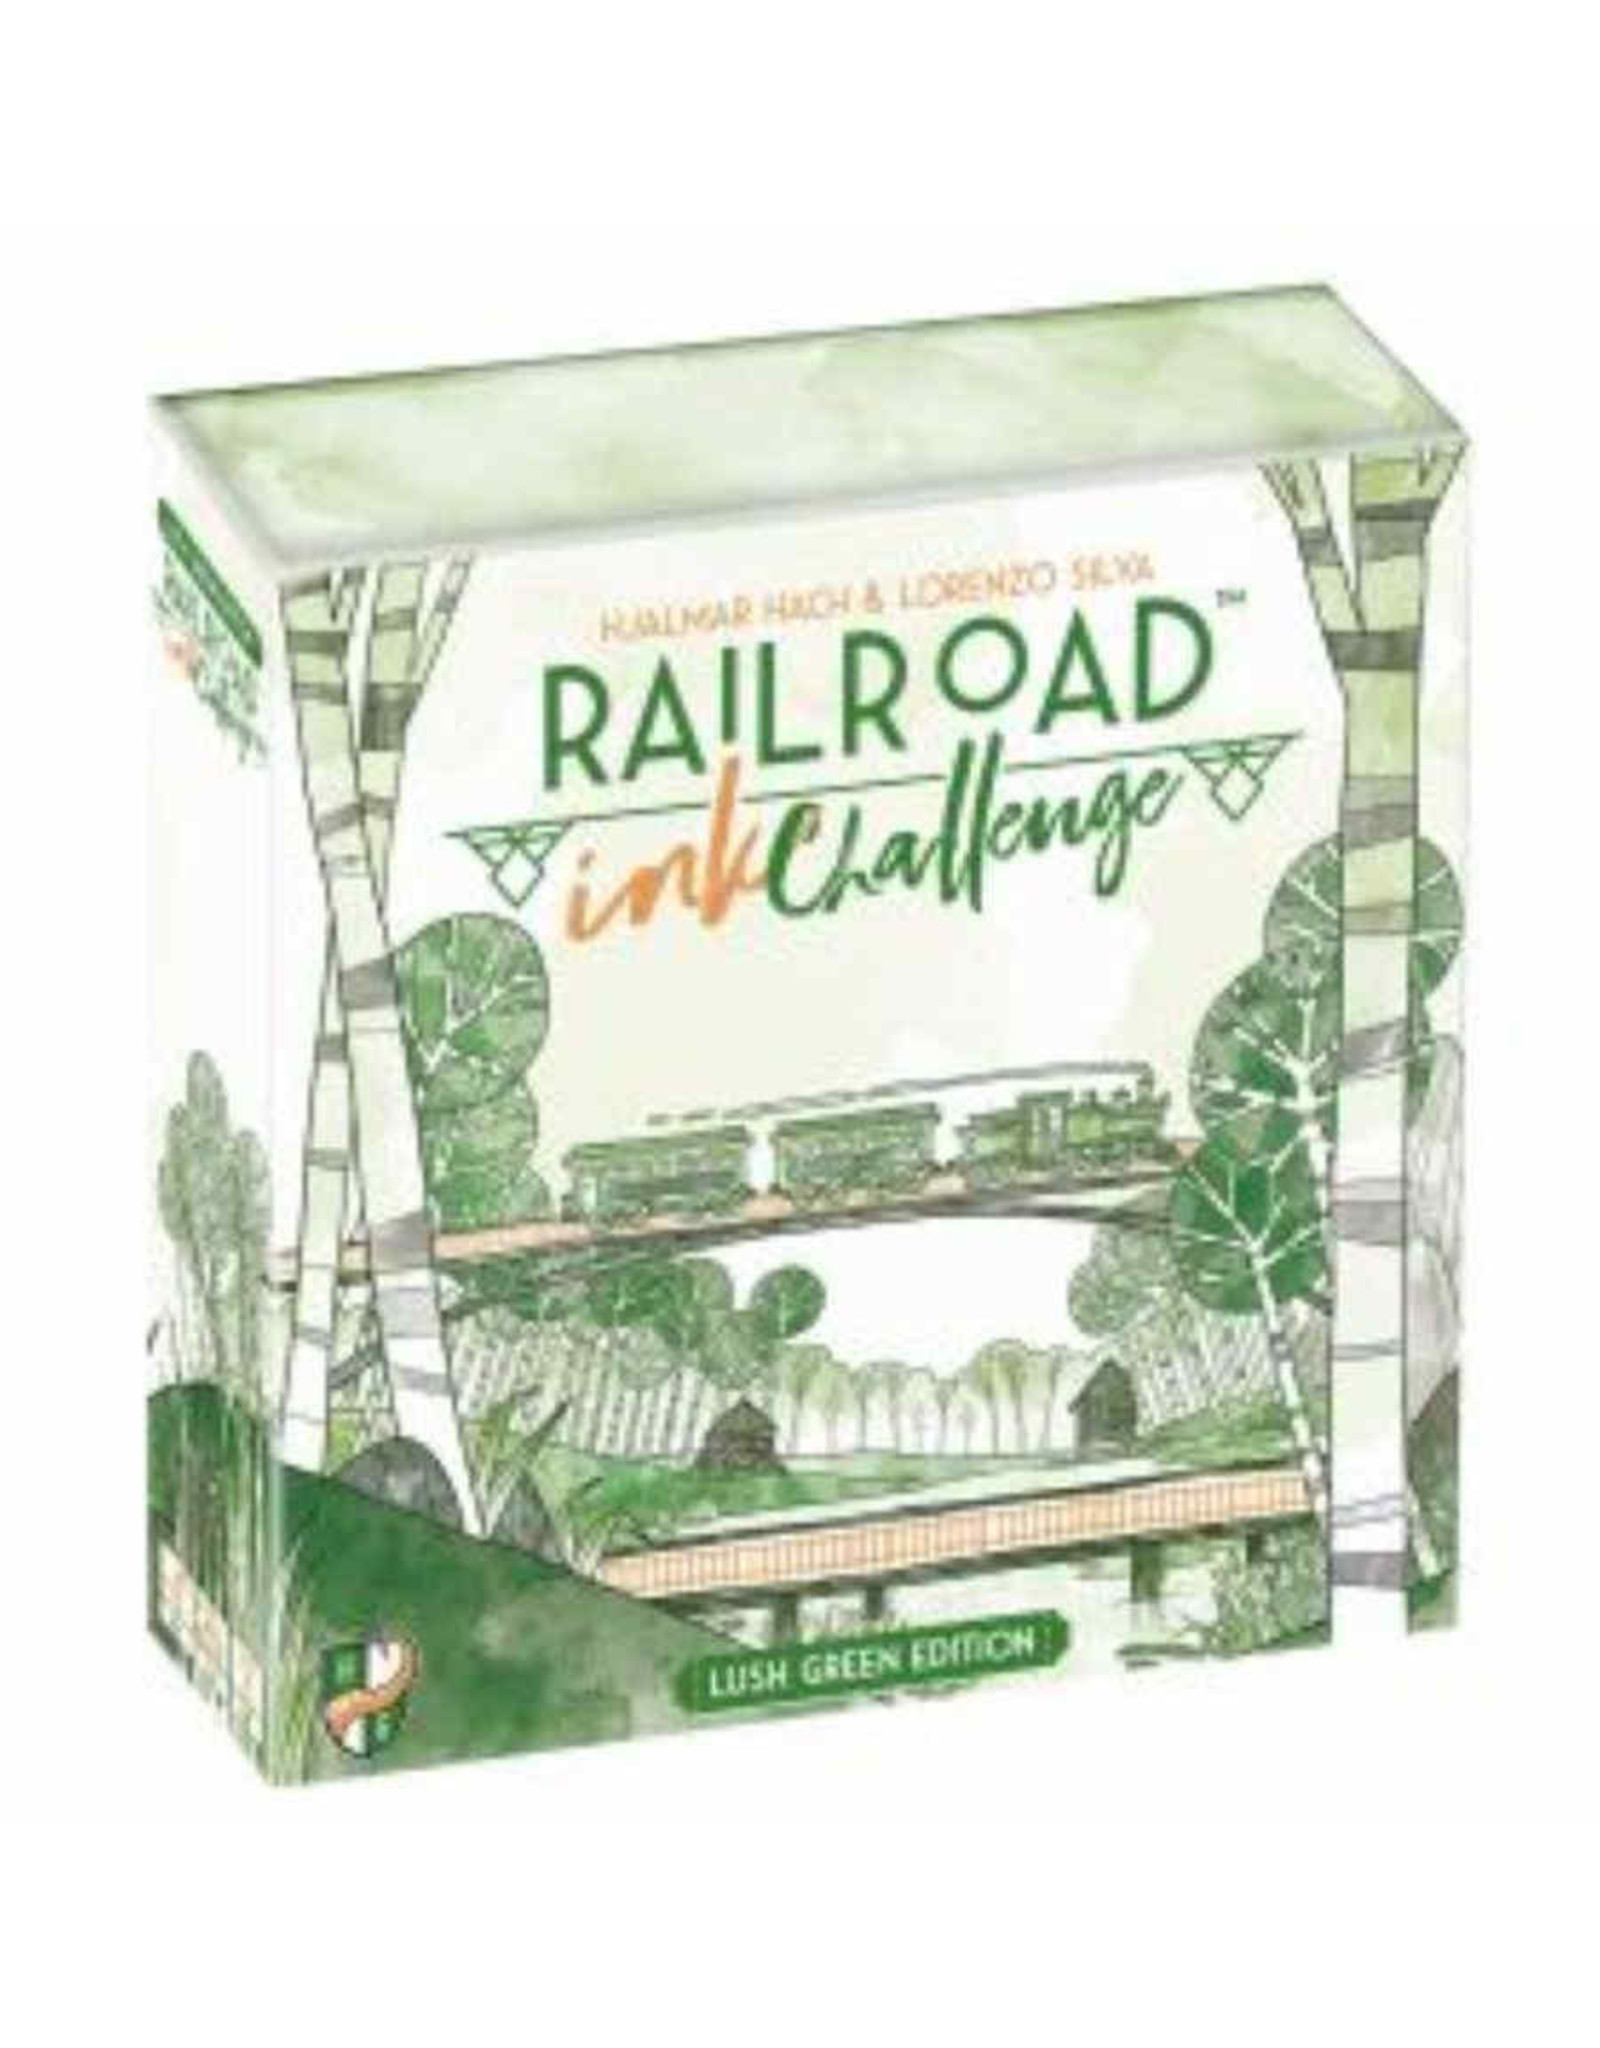 Horrible Games Railroad Ink Challenge: Lush Green Edition